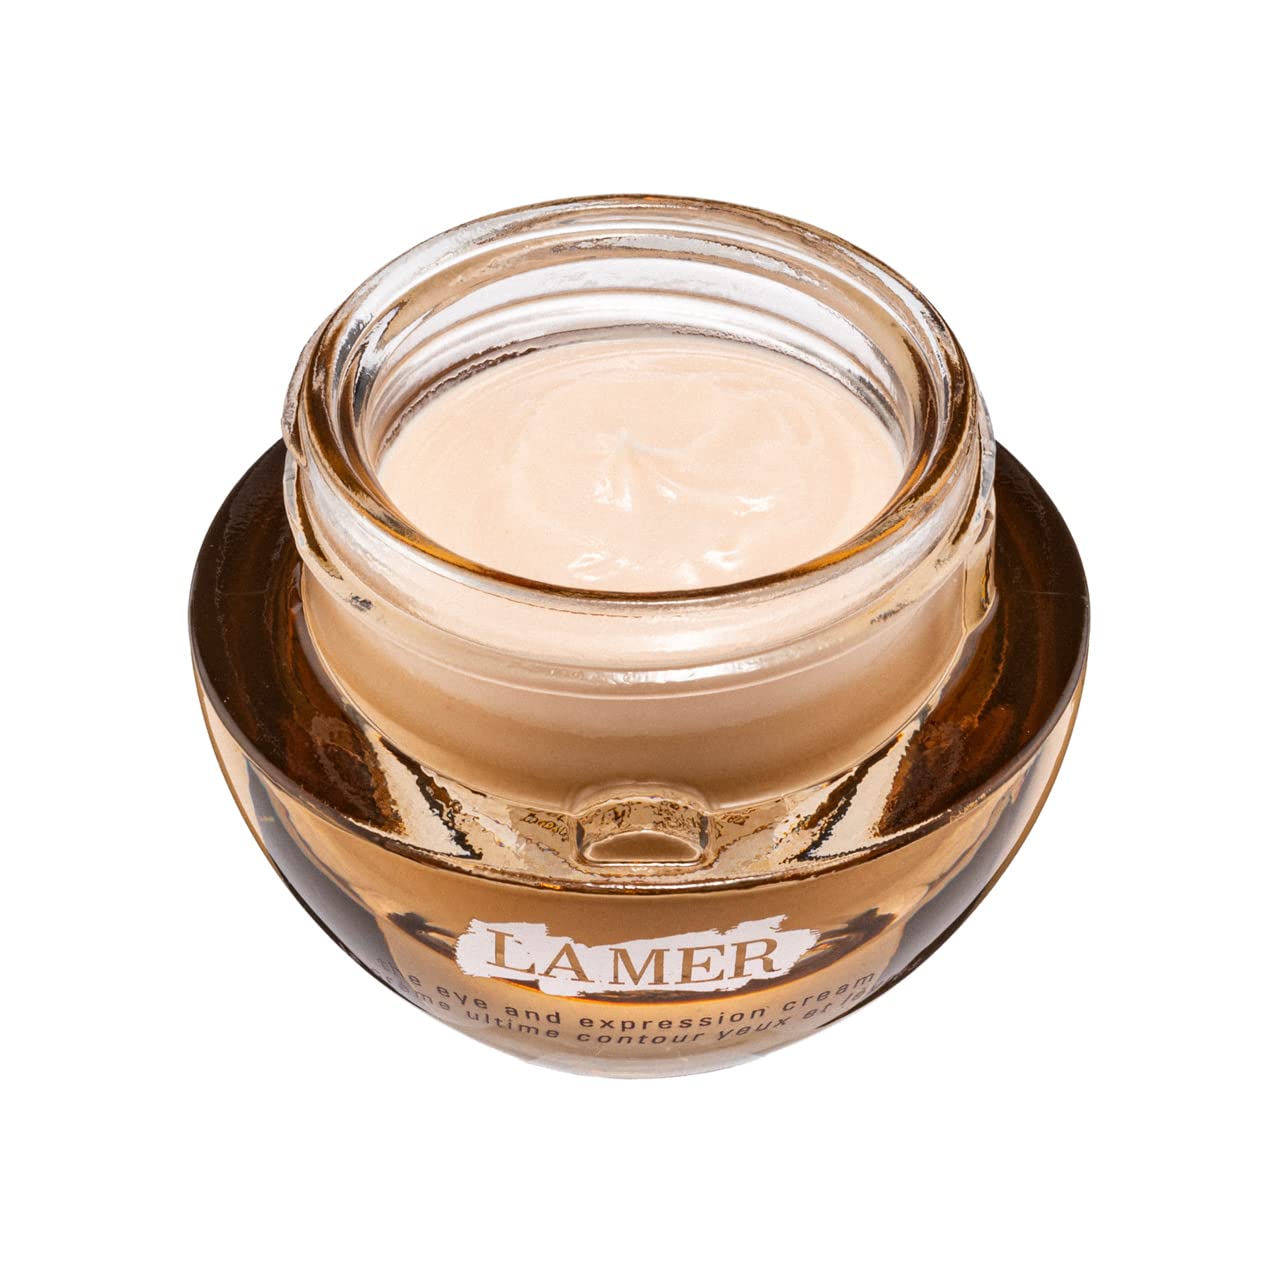 La Mer The Eye and Expression Cream for Women, 0.5 Ounce